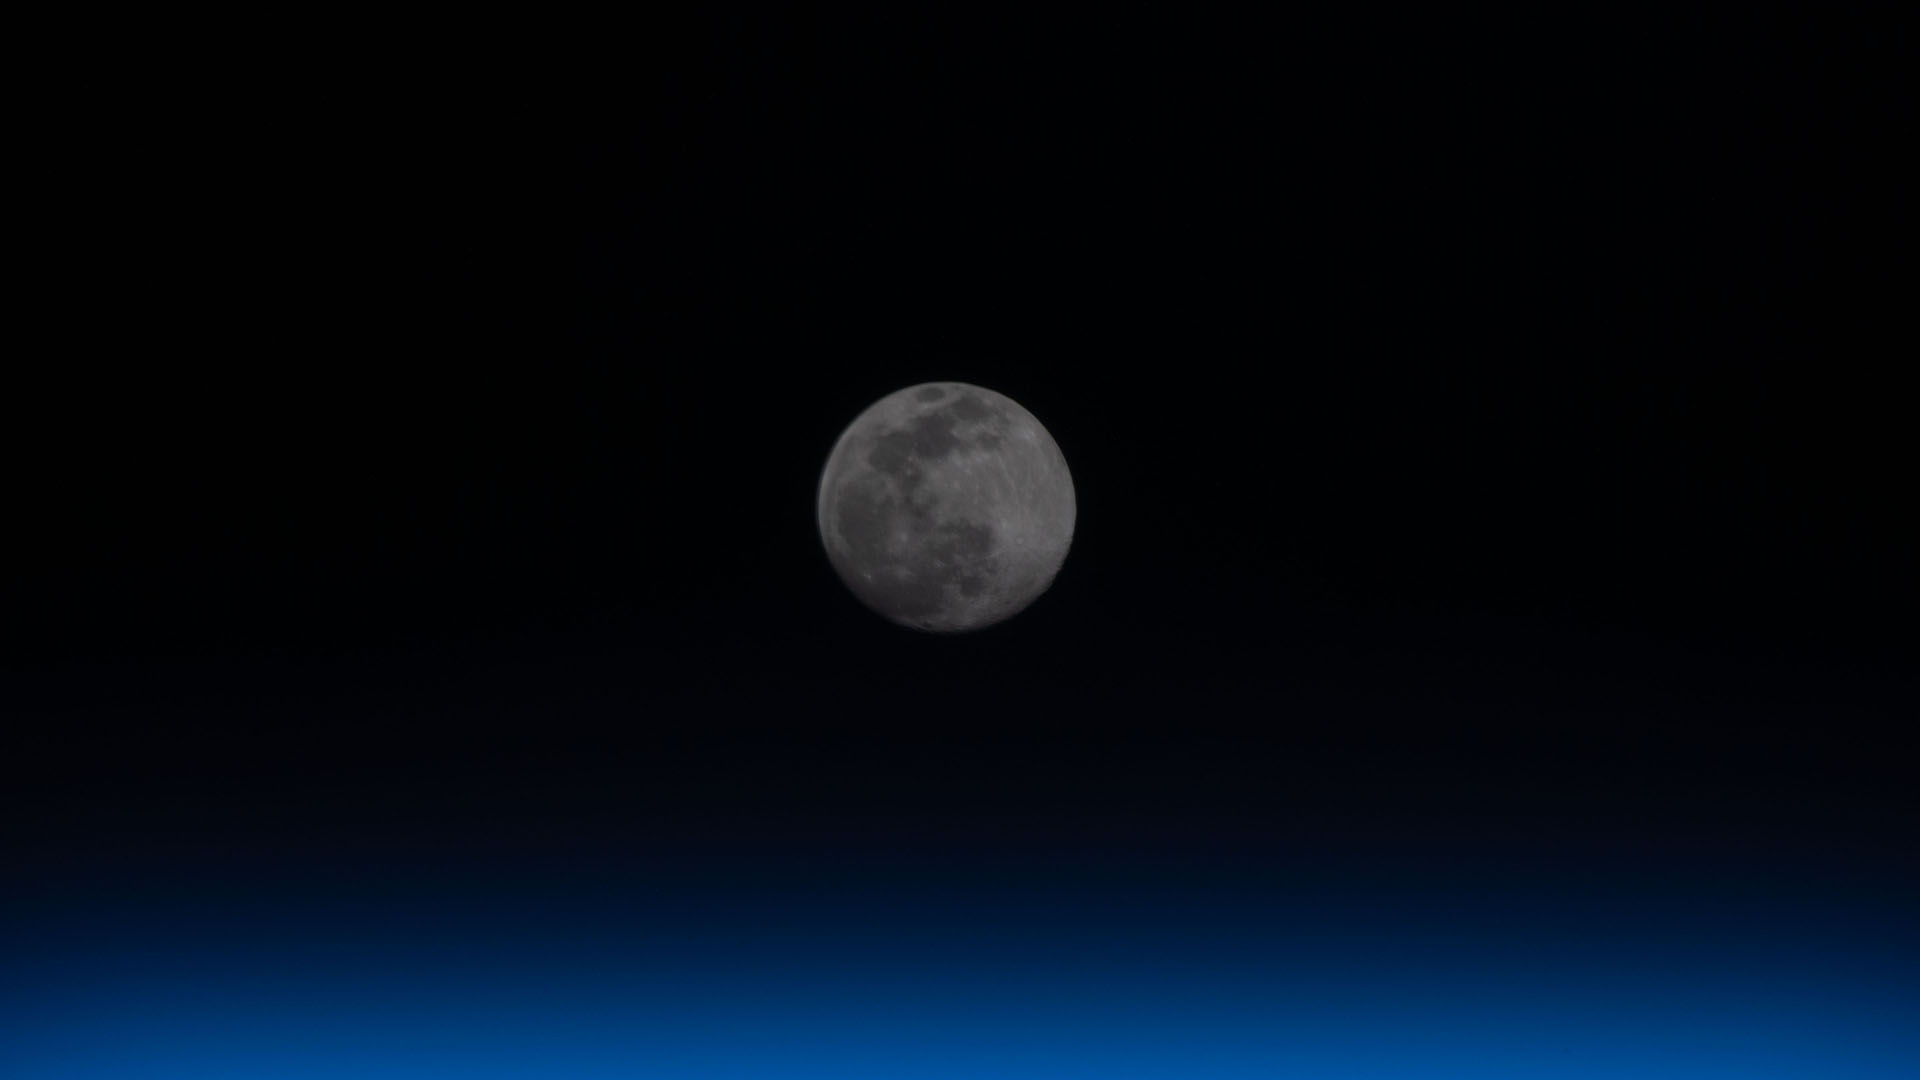 A full moon is pictured above the Earth's horizon.